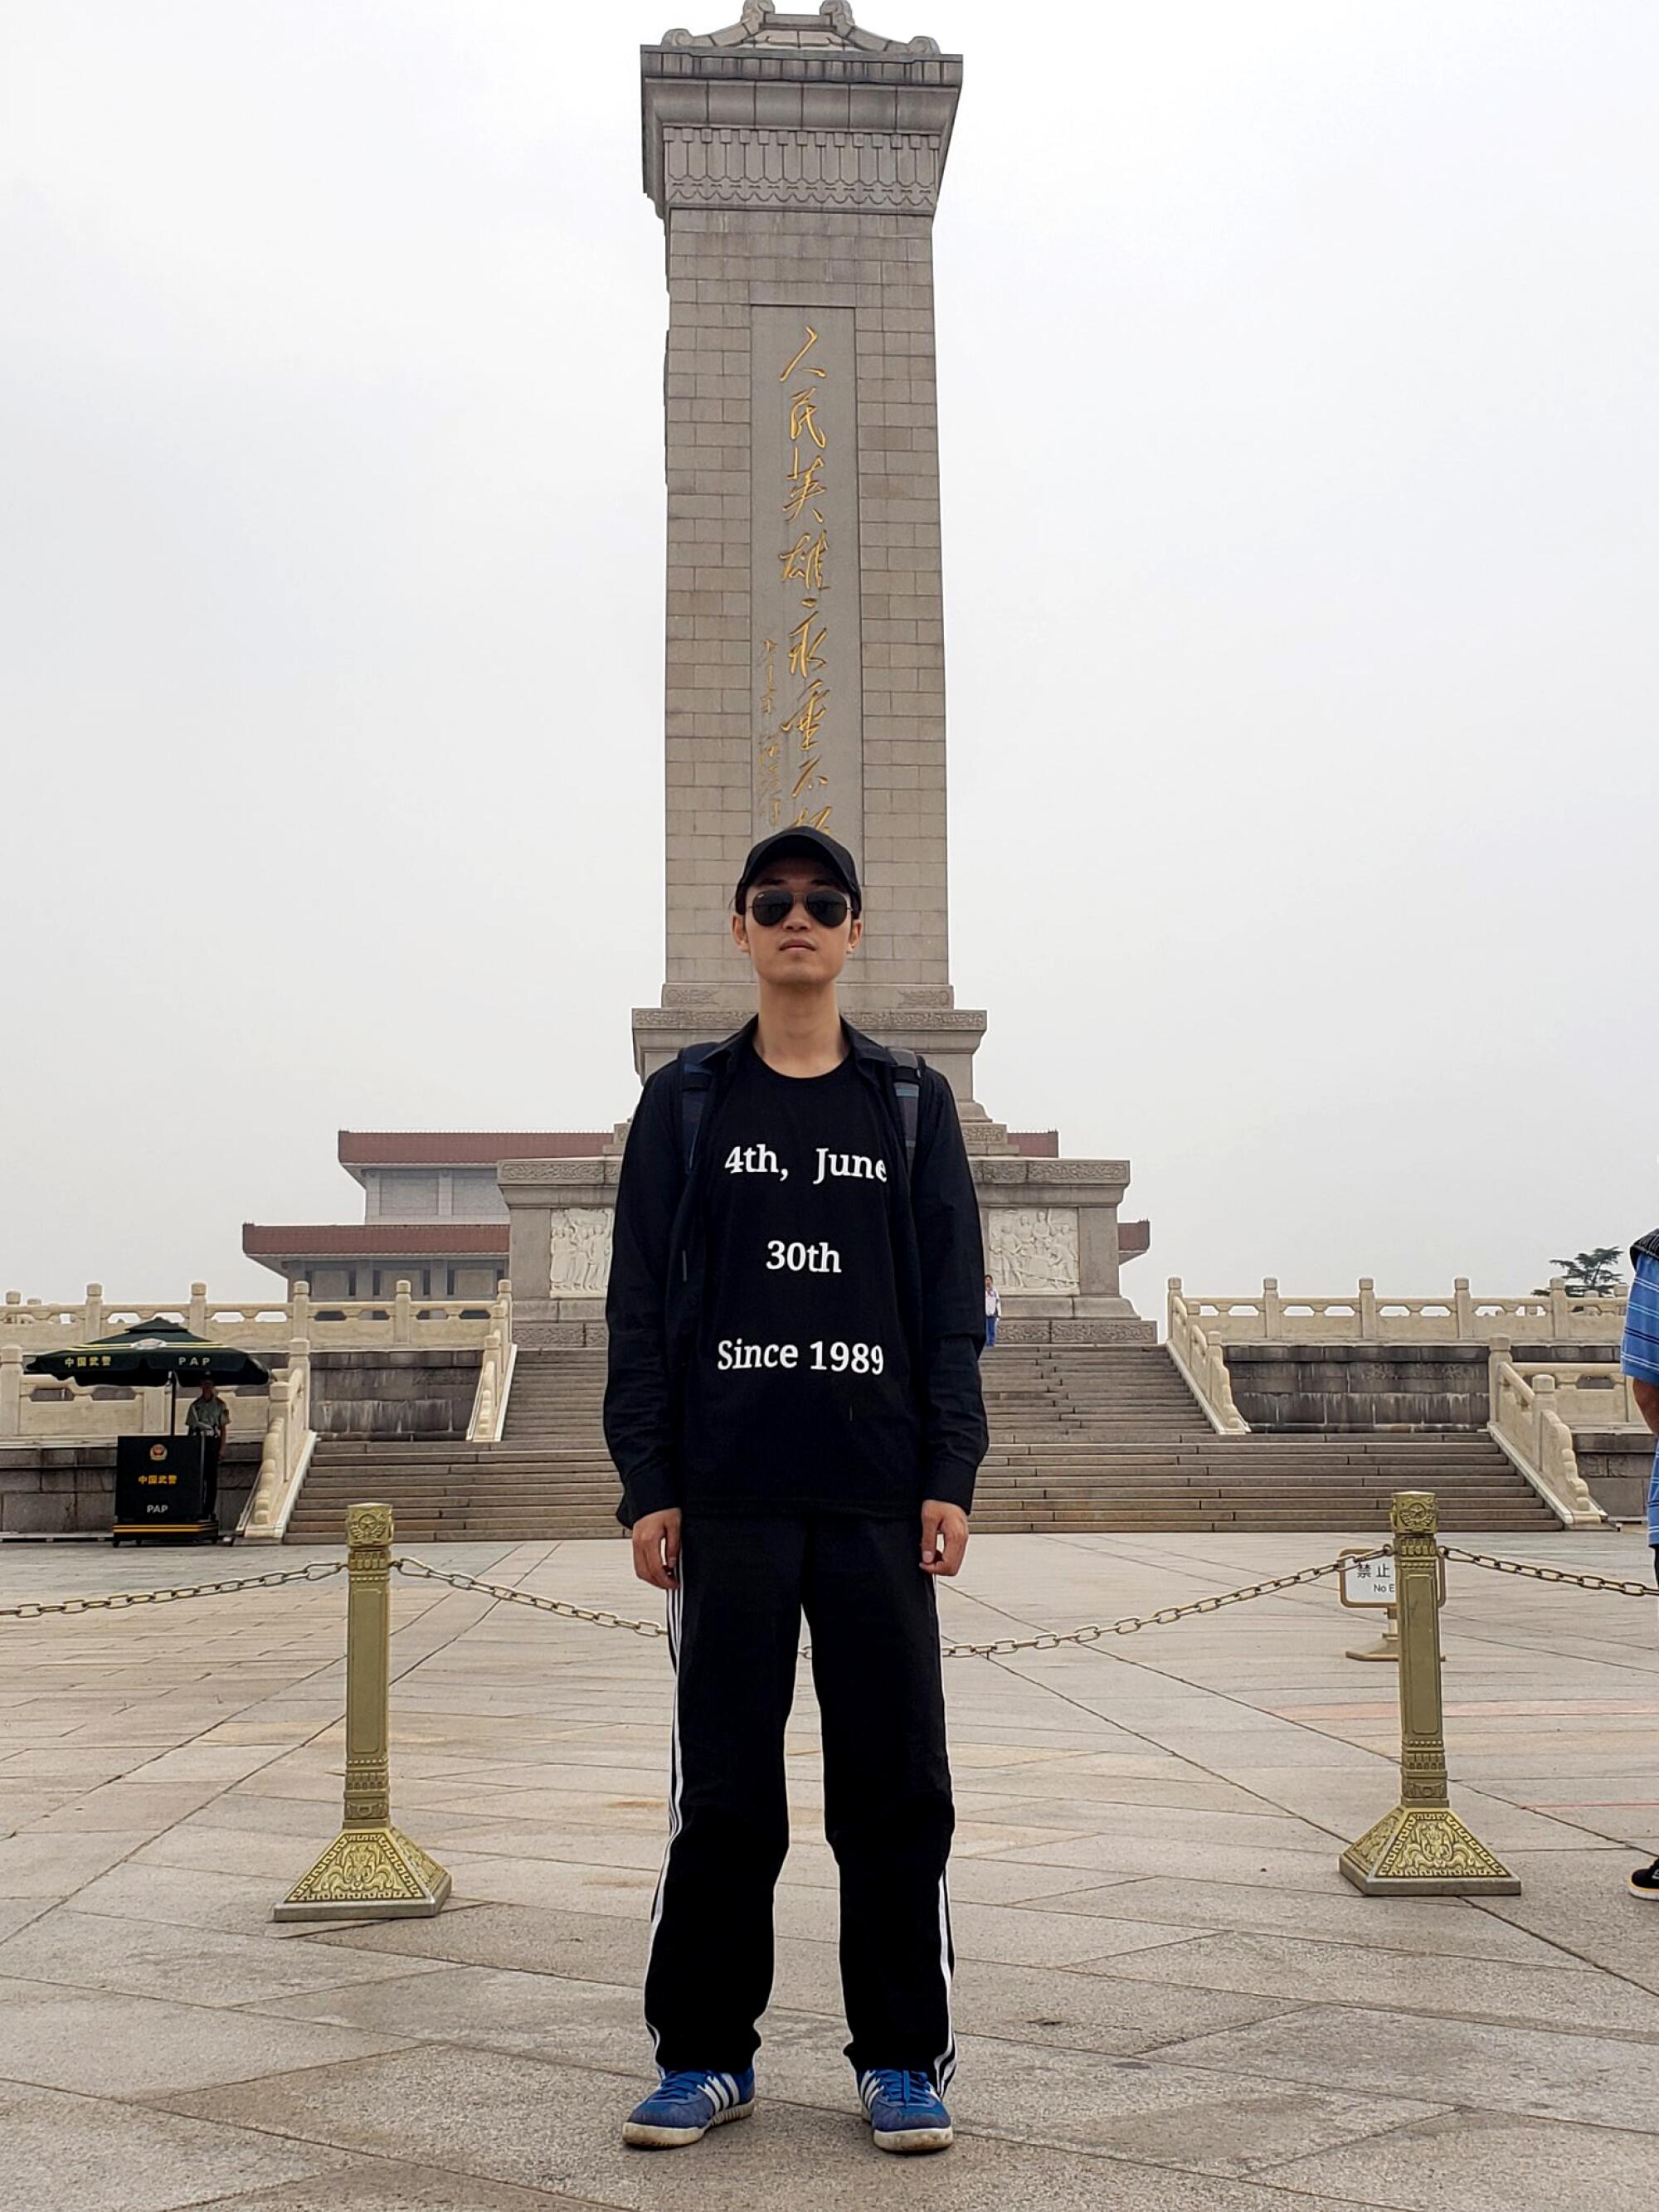 A man dressed all in black stands in front of a beige monument